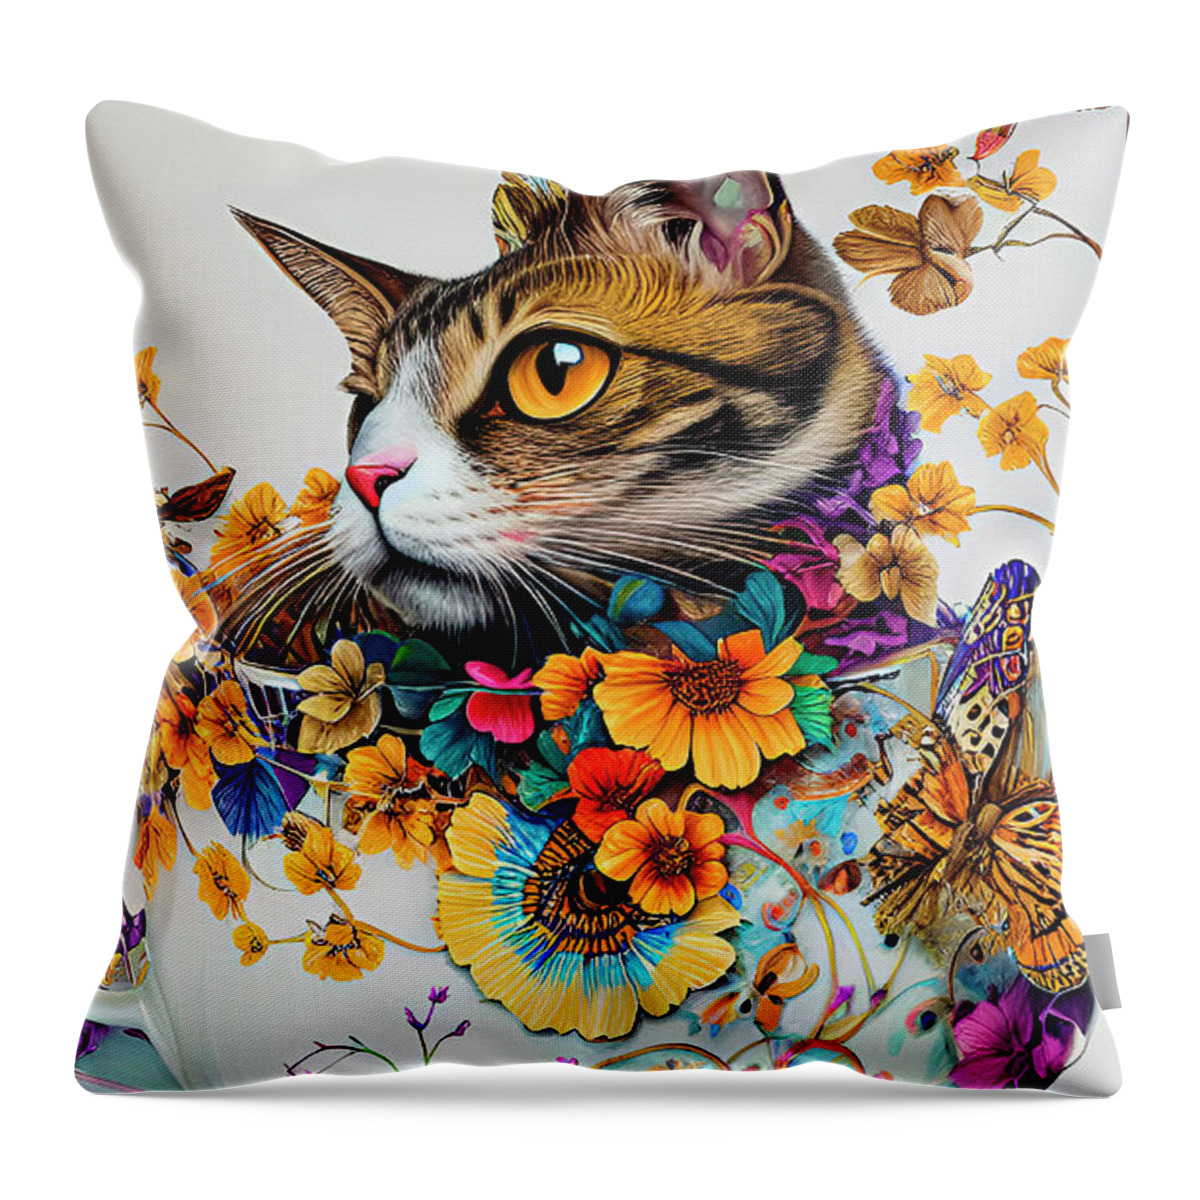 Digital Art Throw Pillow featuring the digital art Cat In A Cup Ginette In Wonderland Digital Art by Ginette Callaway